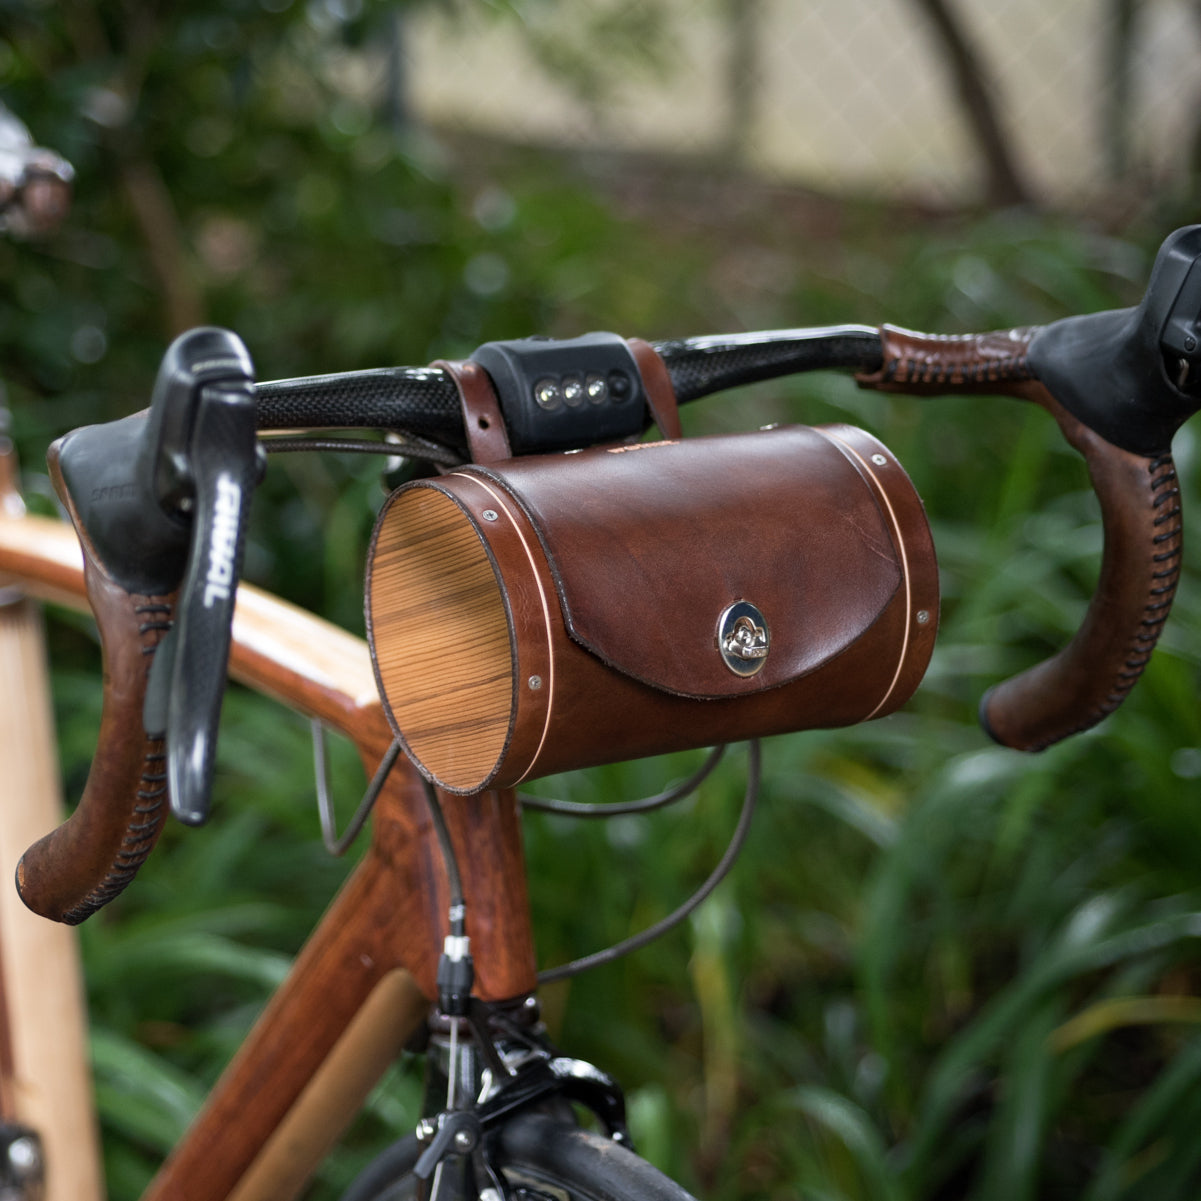 Dark brown leather bicycle barrel bag on handlebars with wood end pieces